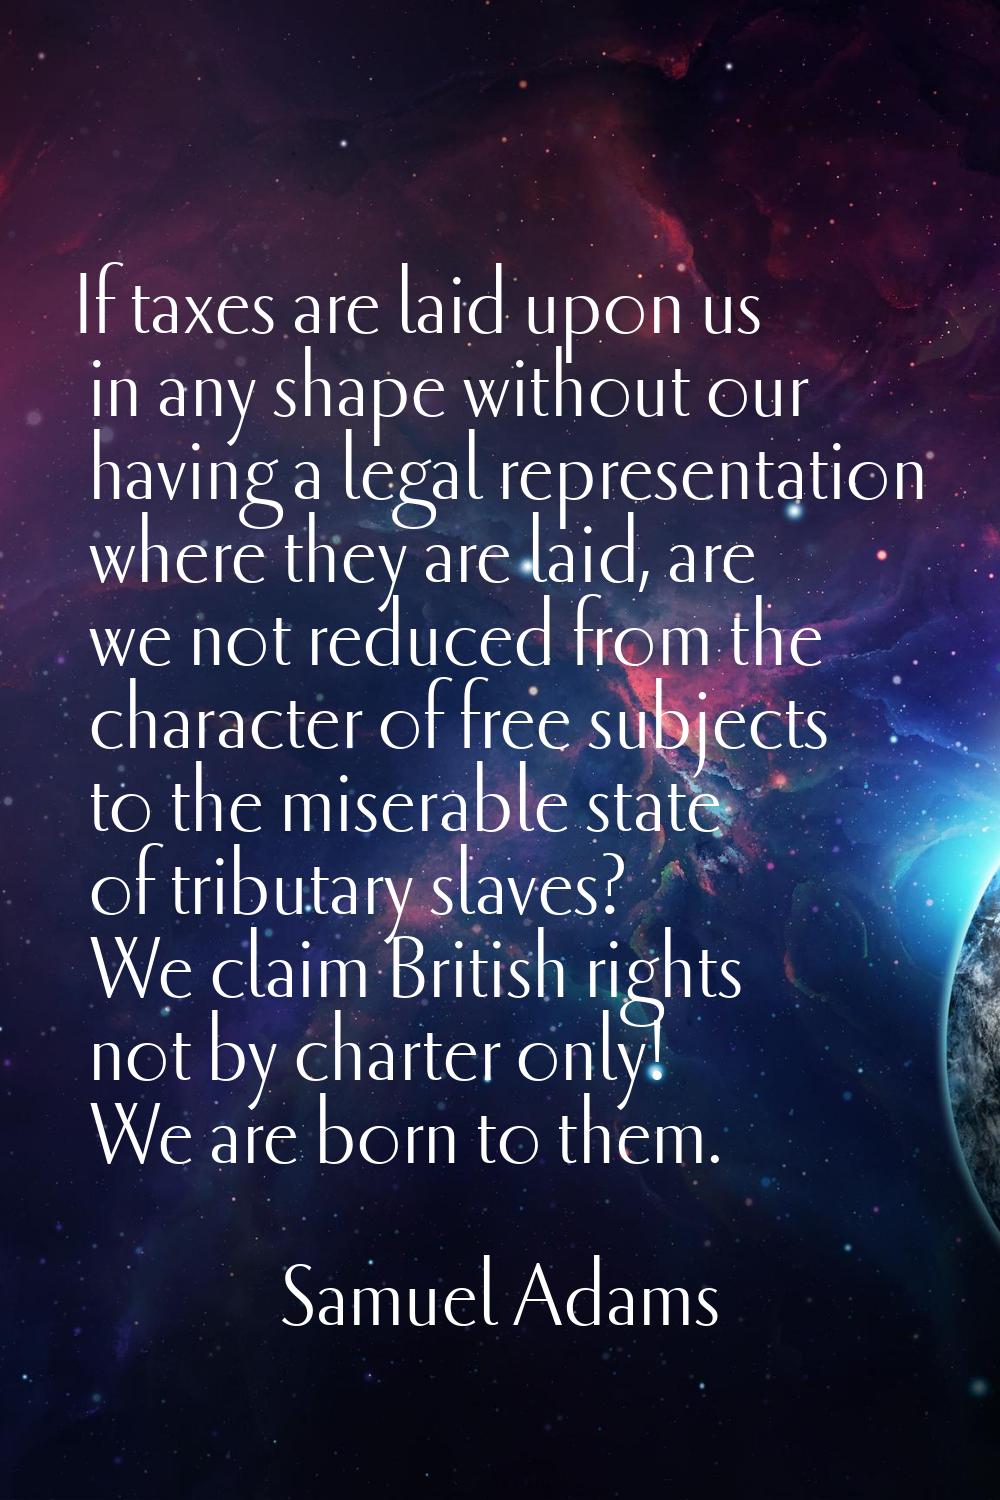 If taxes are laid upon us in any shape without our having a legal representation where they are lai